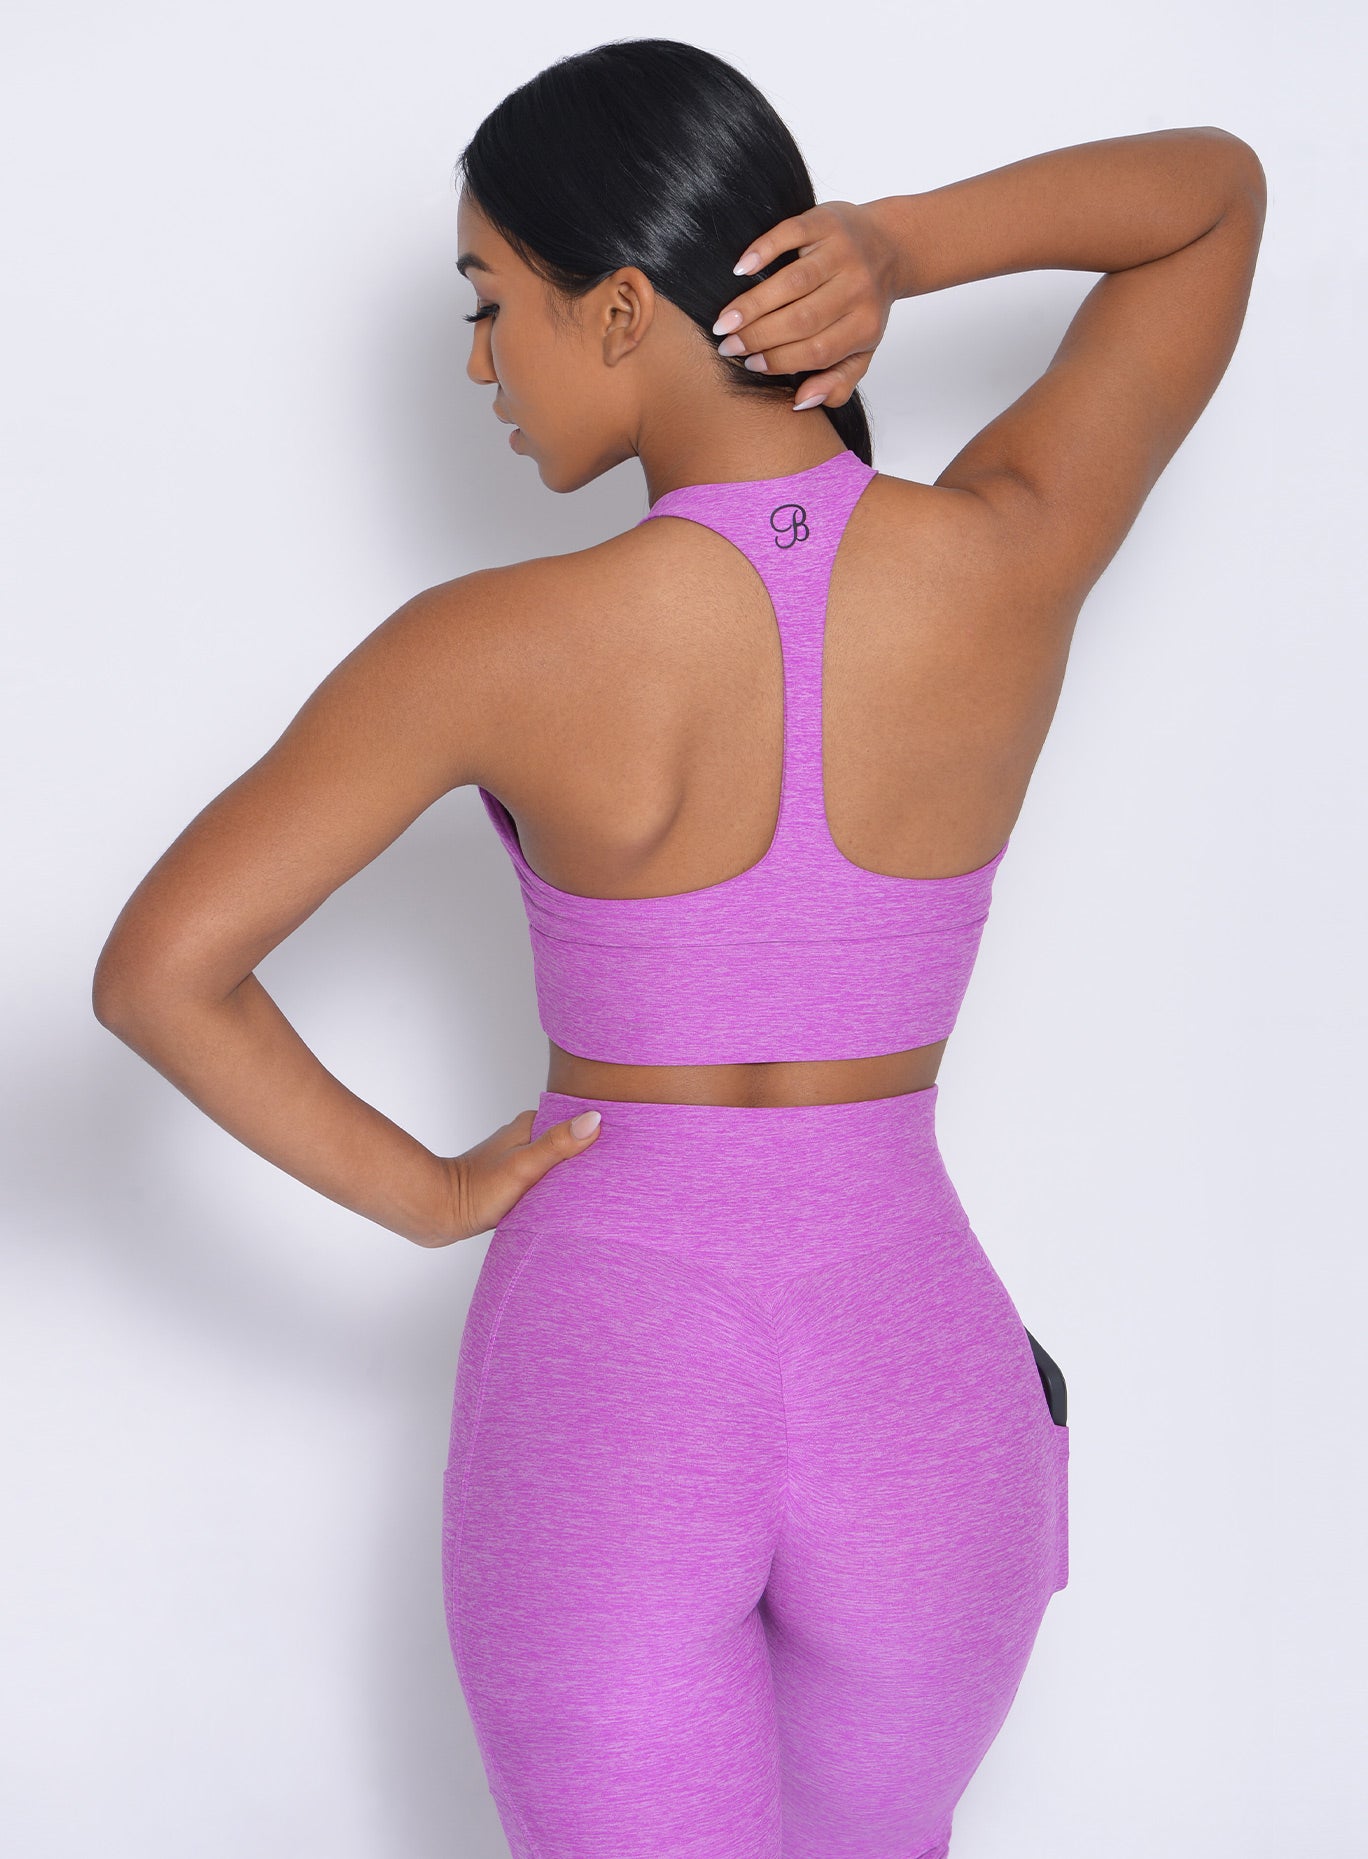 Back view of the model in our edgy longline bra in purple rain color and a matching leggings